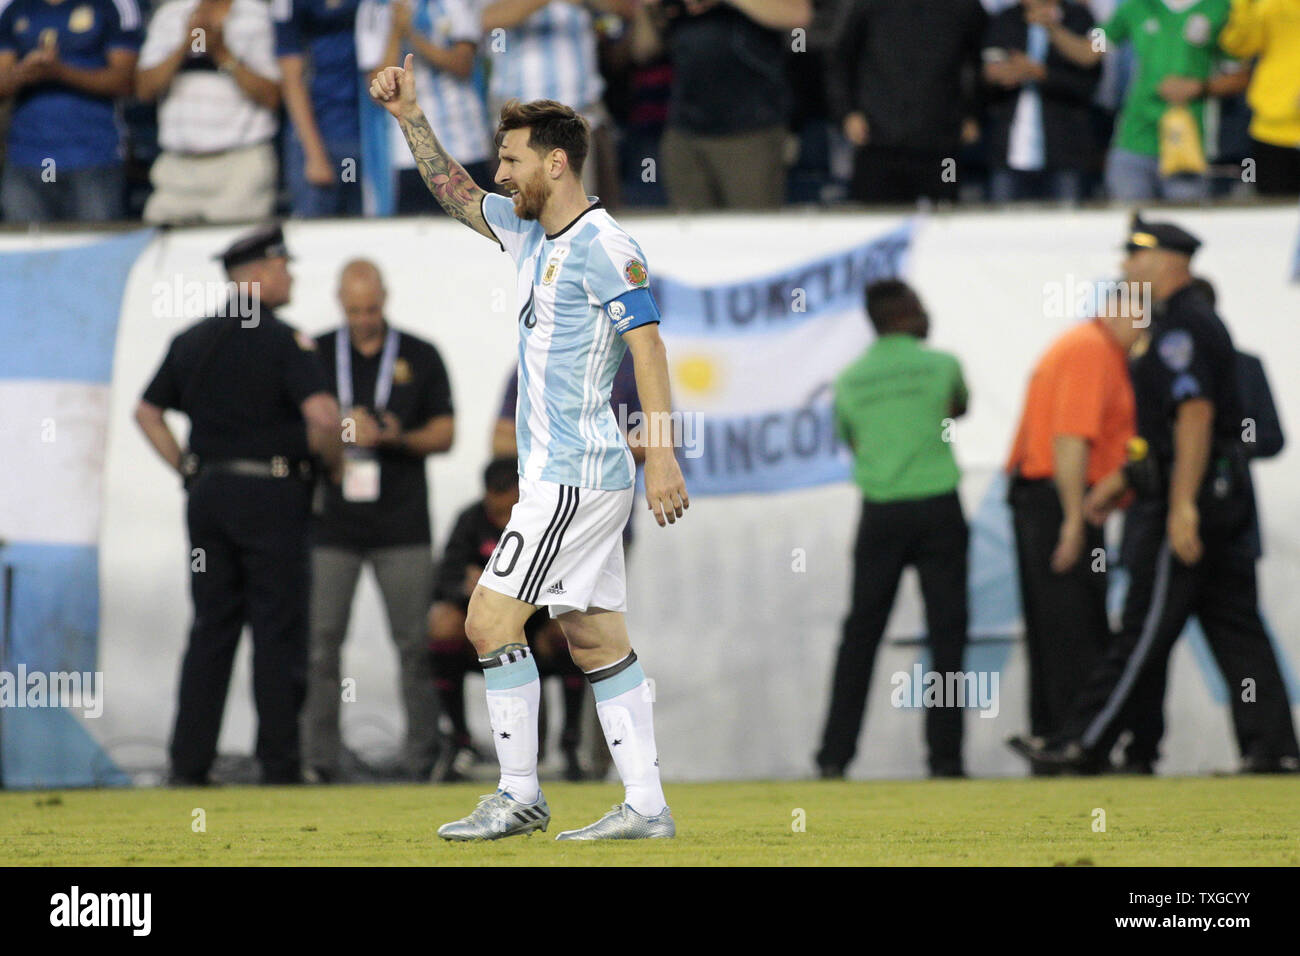 Argentina midfielder Lionel Messi (10) gives a thumbs up after scoring against Venezuela in the second half of the 2016 Copa America Centenario quarterfinal match at Gillette Stadium in Foxborough, Massachusetts on June 18, 2016. Argentina defeated Venezuela 4-1. Photo by Matthew Healey/UPI Stock Photo